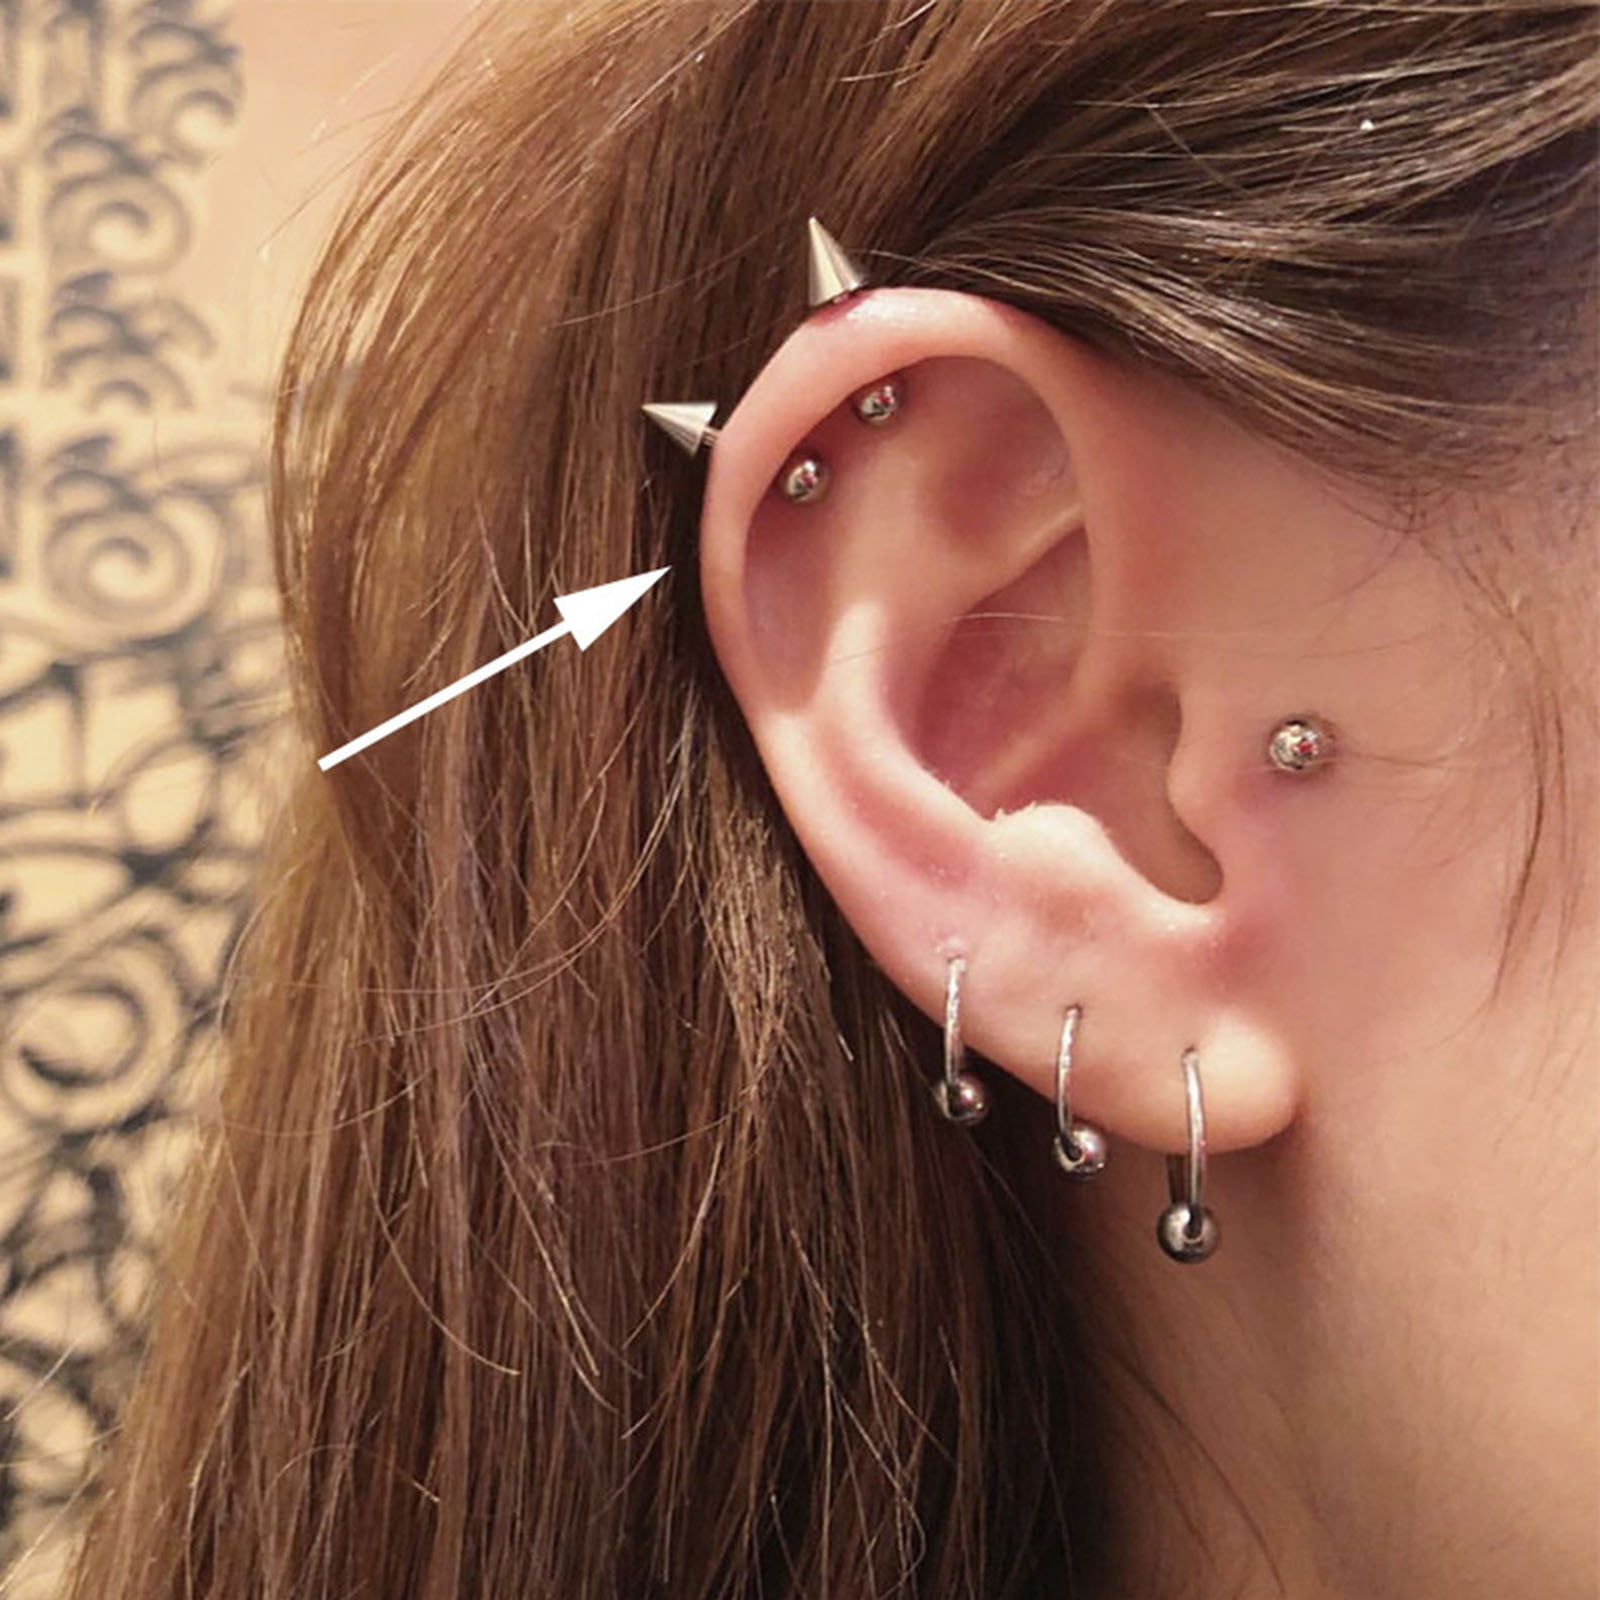 Thoughts on healing helix with ring? (See comments) : r/piercing